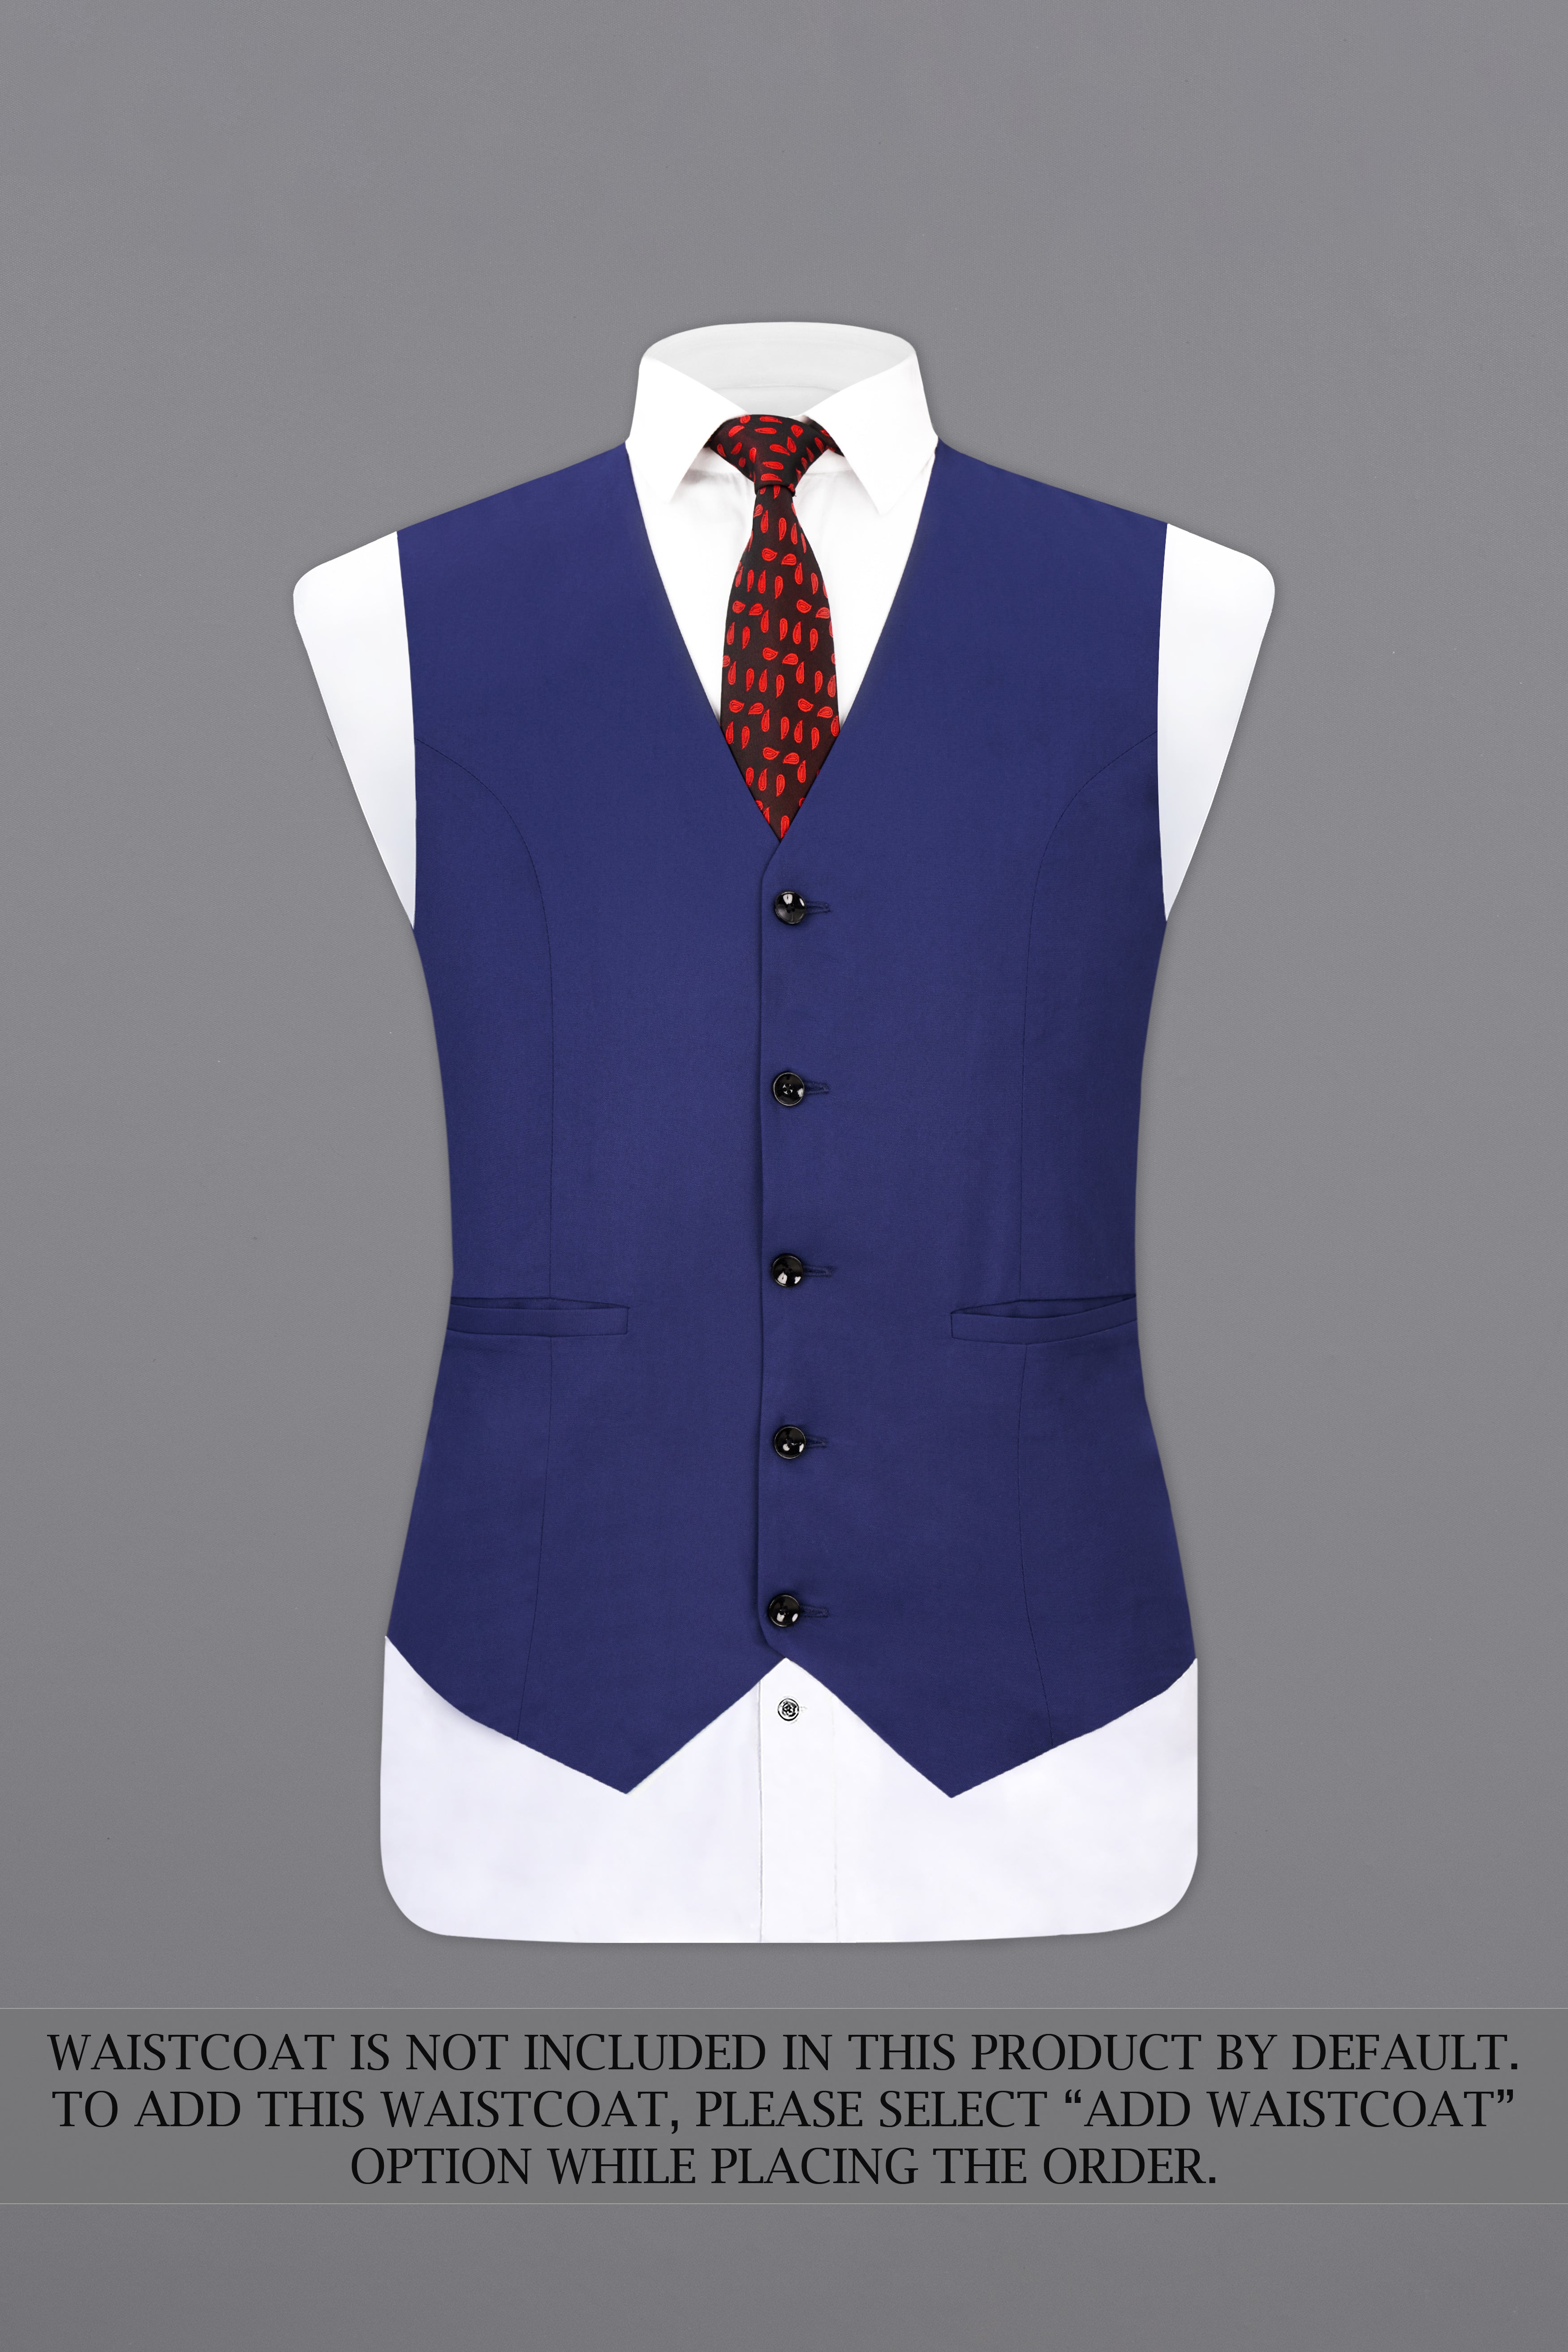 Royal Blue Single Breasted Suit